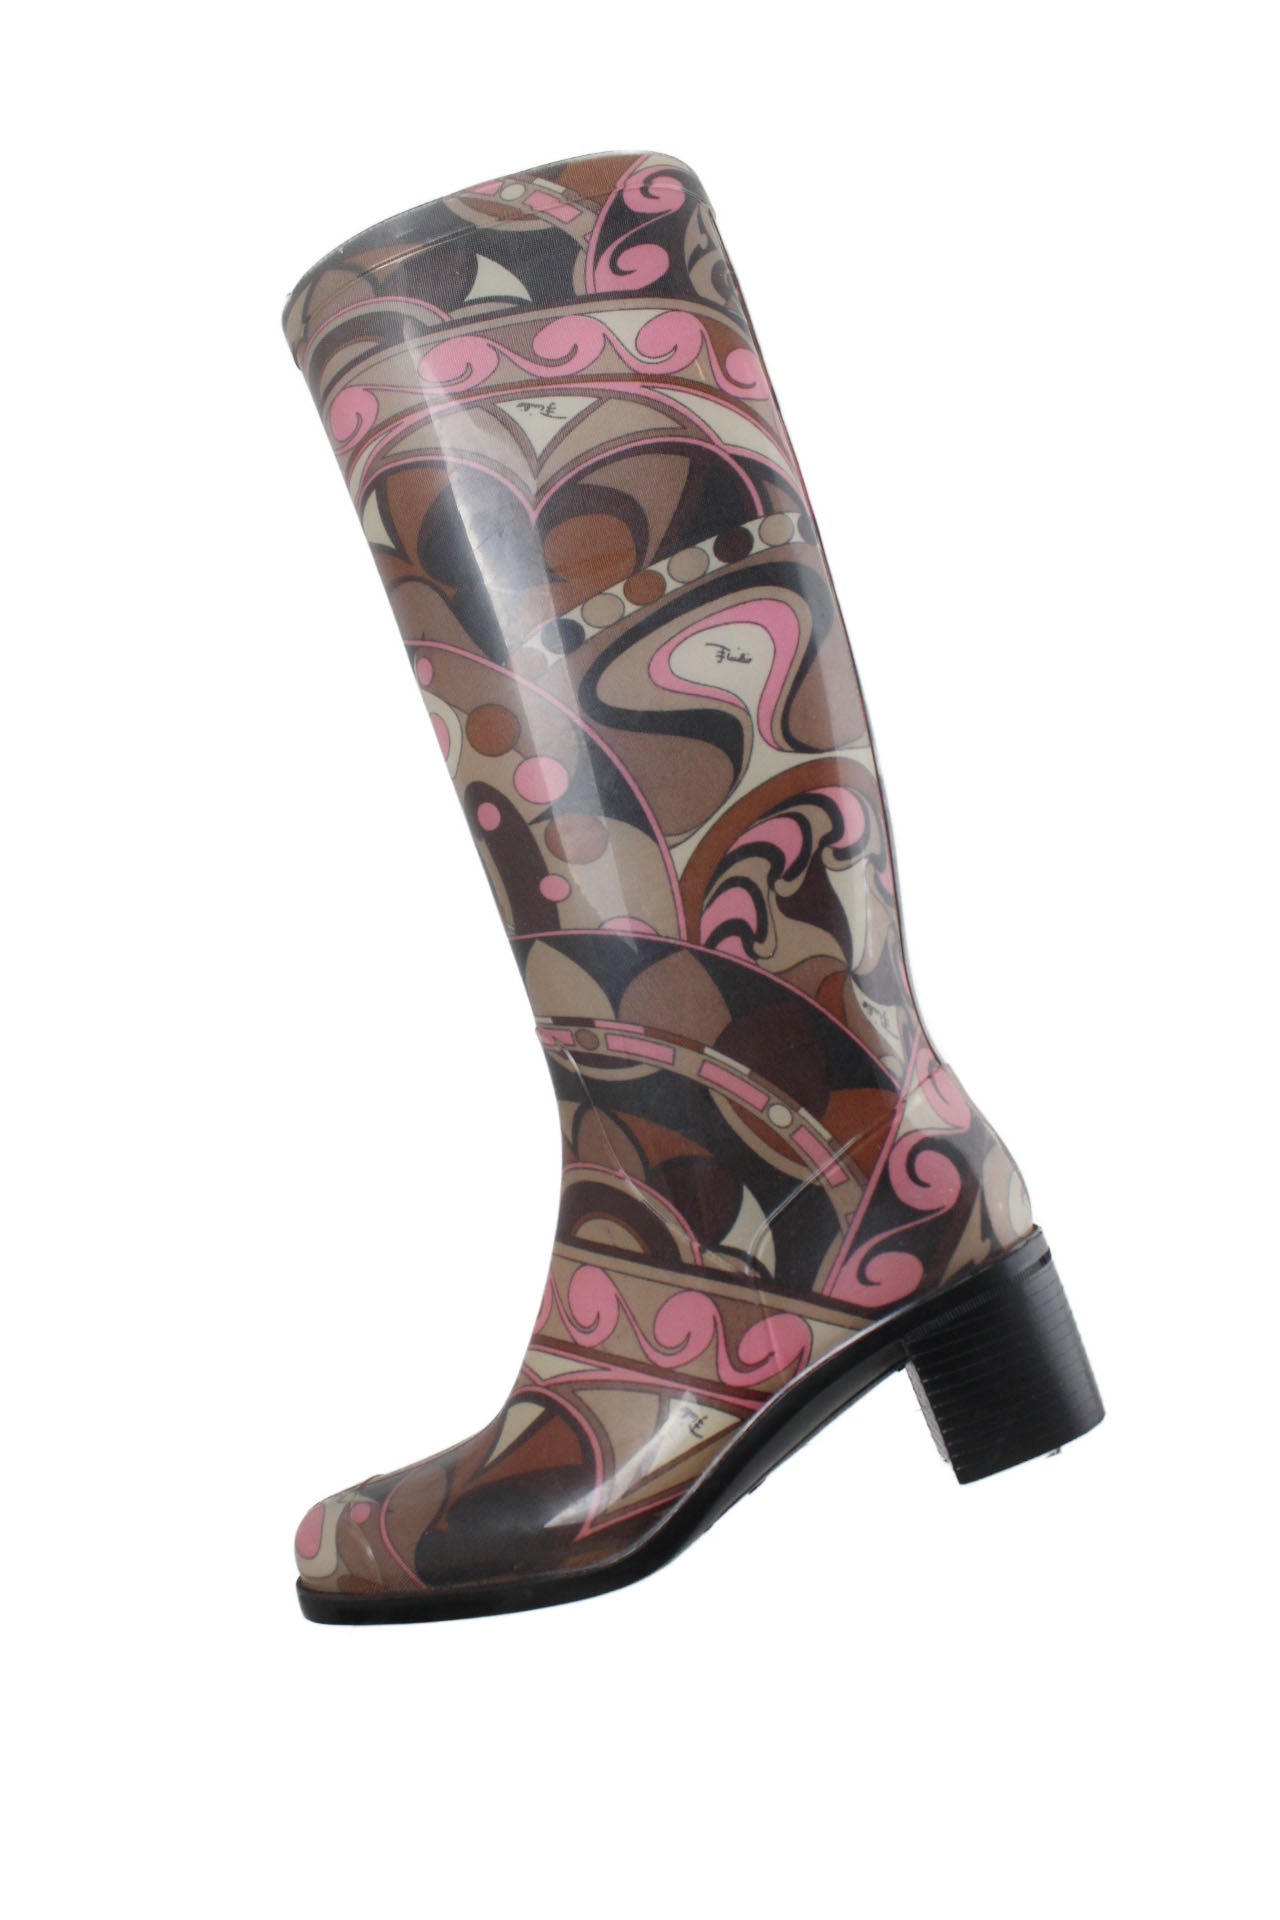 profile of  emilio pucci brown and pink rubber rain boots. features abstract print throughout, high top, block heels, and pull on style. 